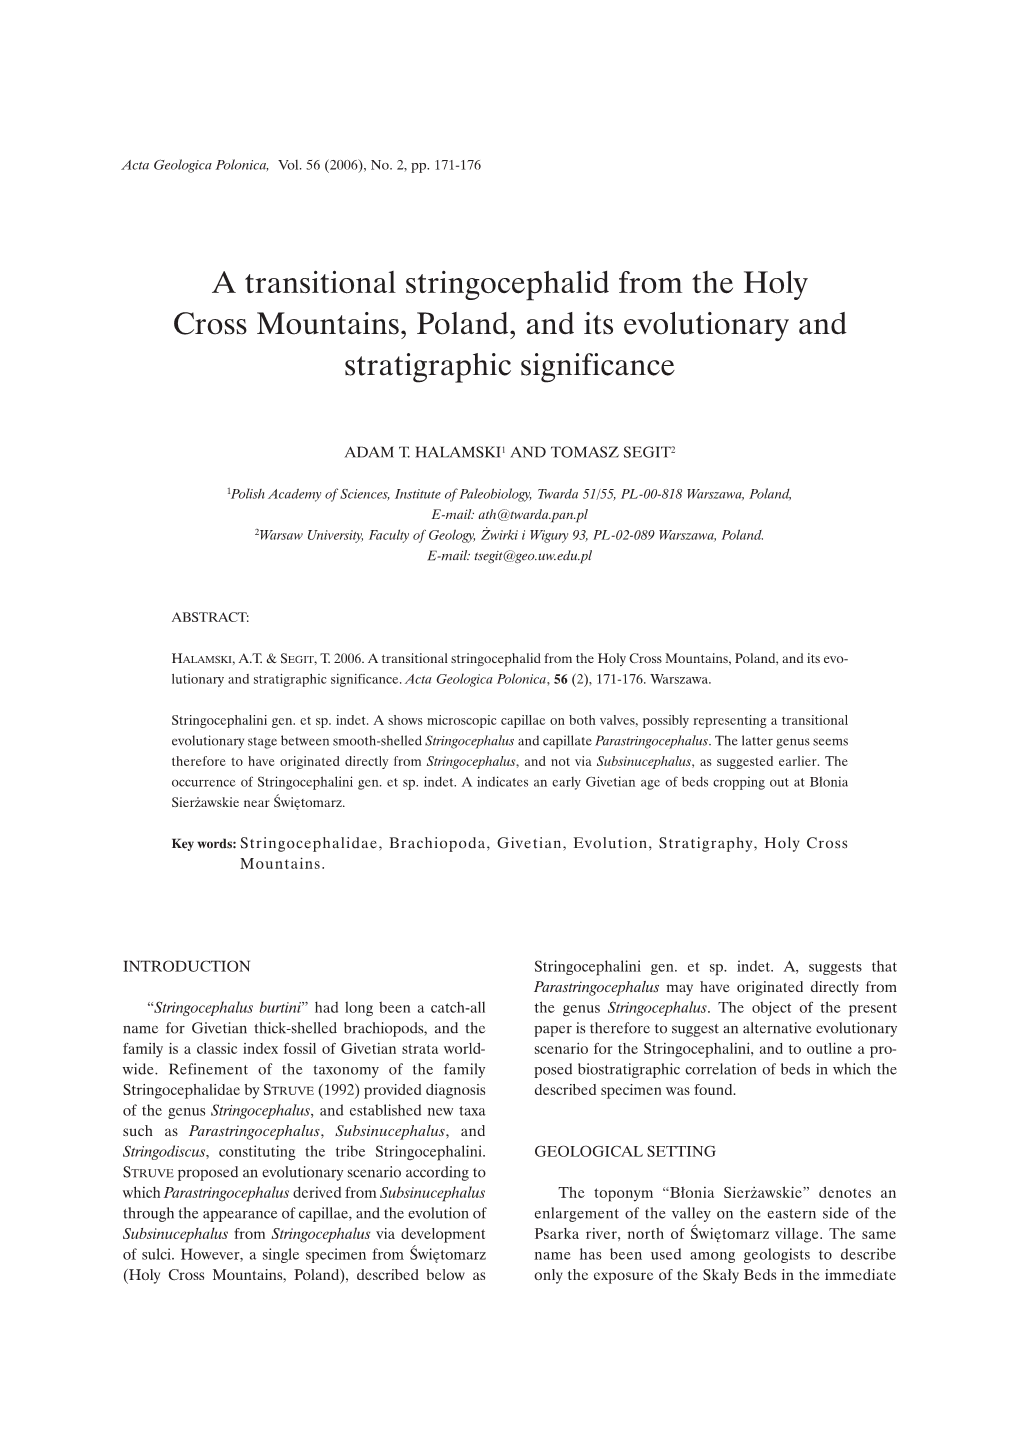 A Transitional Stringocephalid from the Holy Cross Mountains, Poland, and Its Evolutionary and Stratigraphic Significance